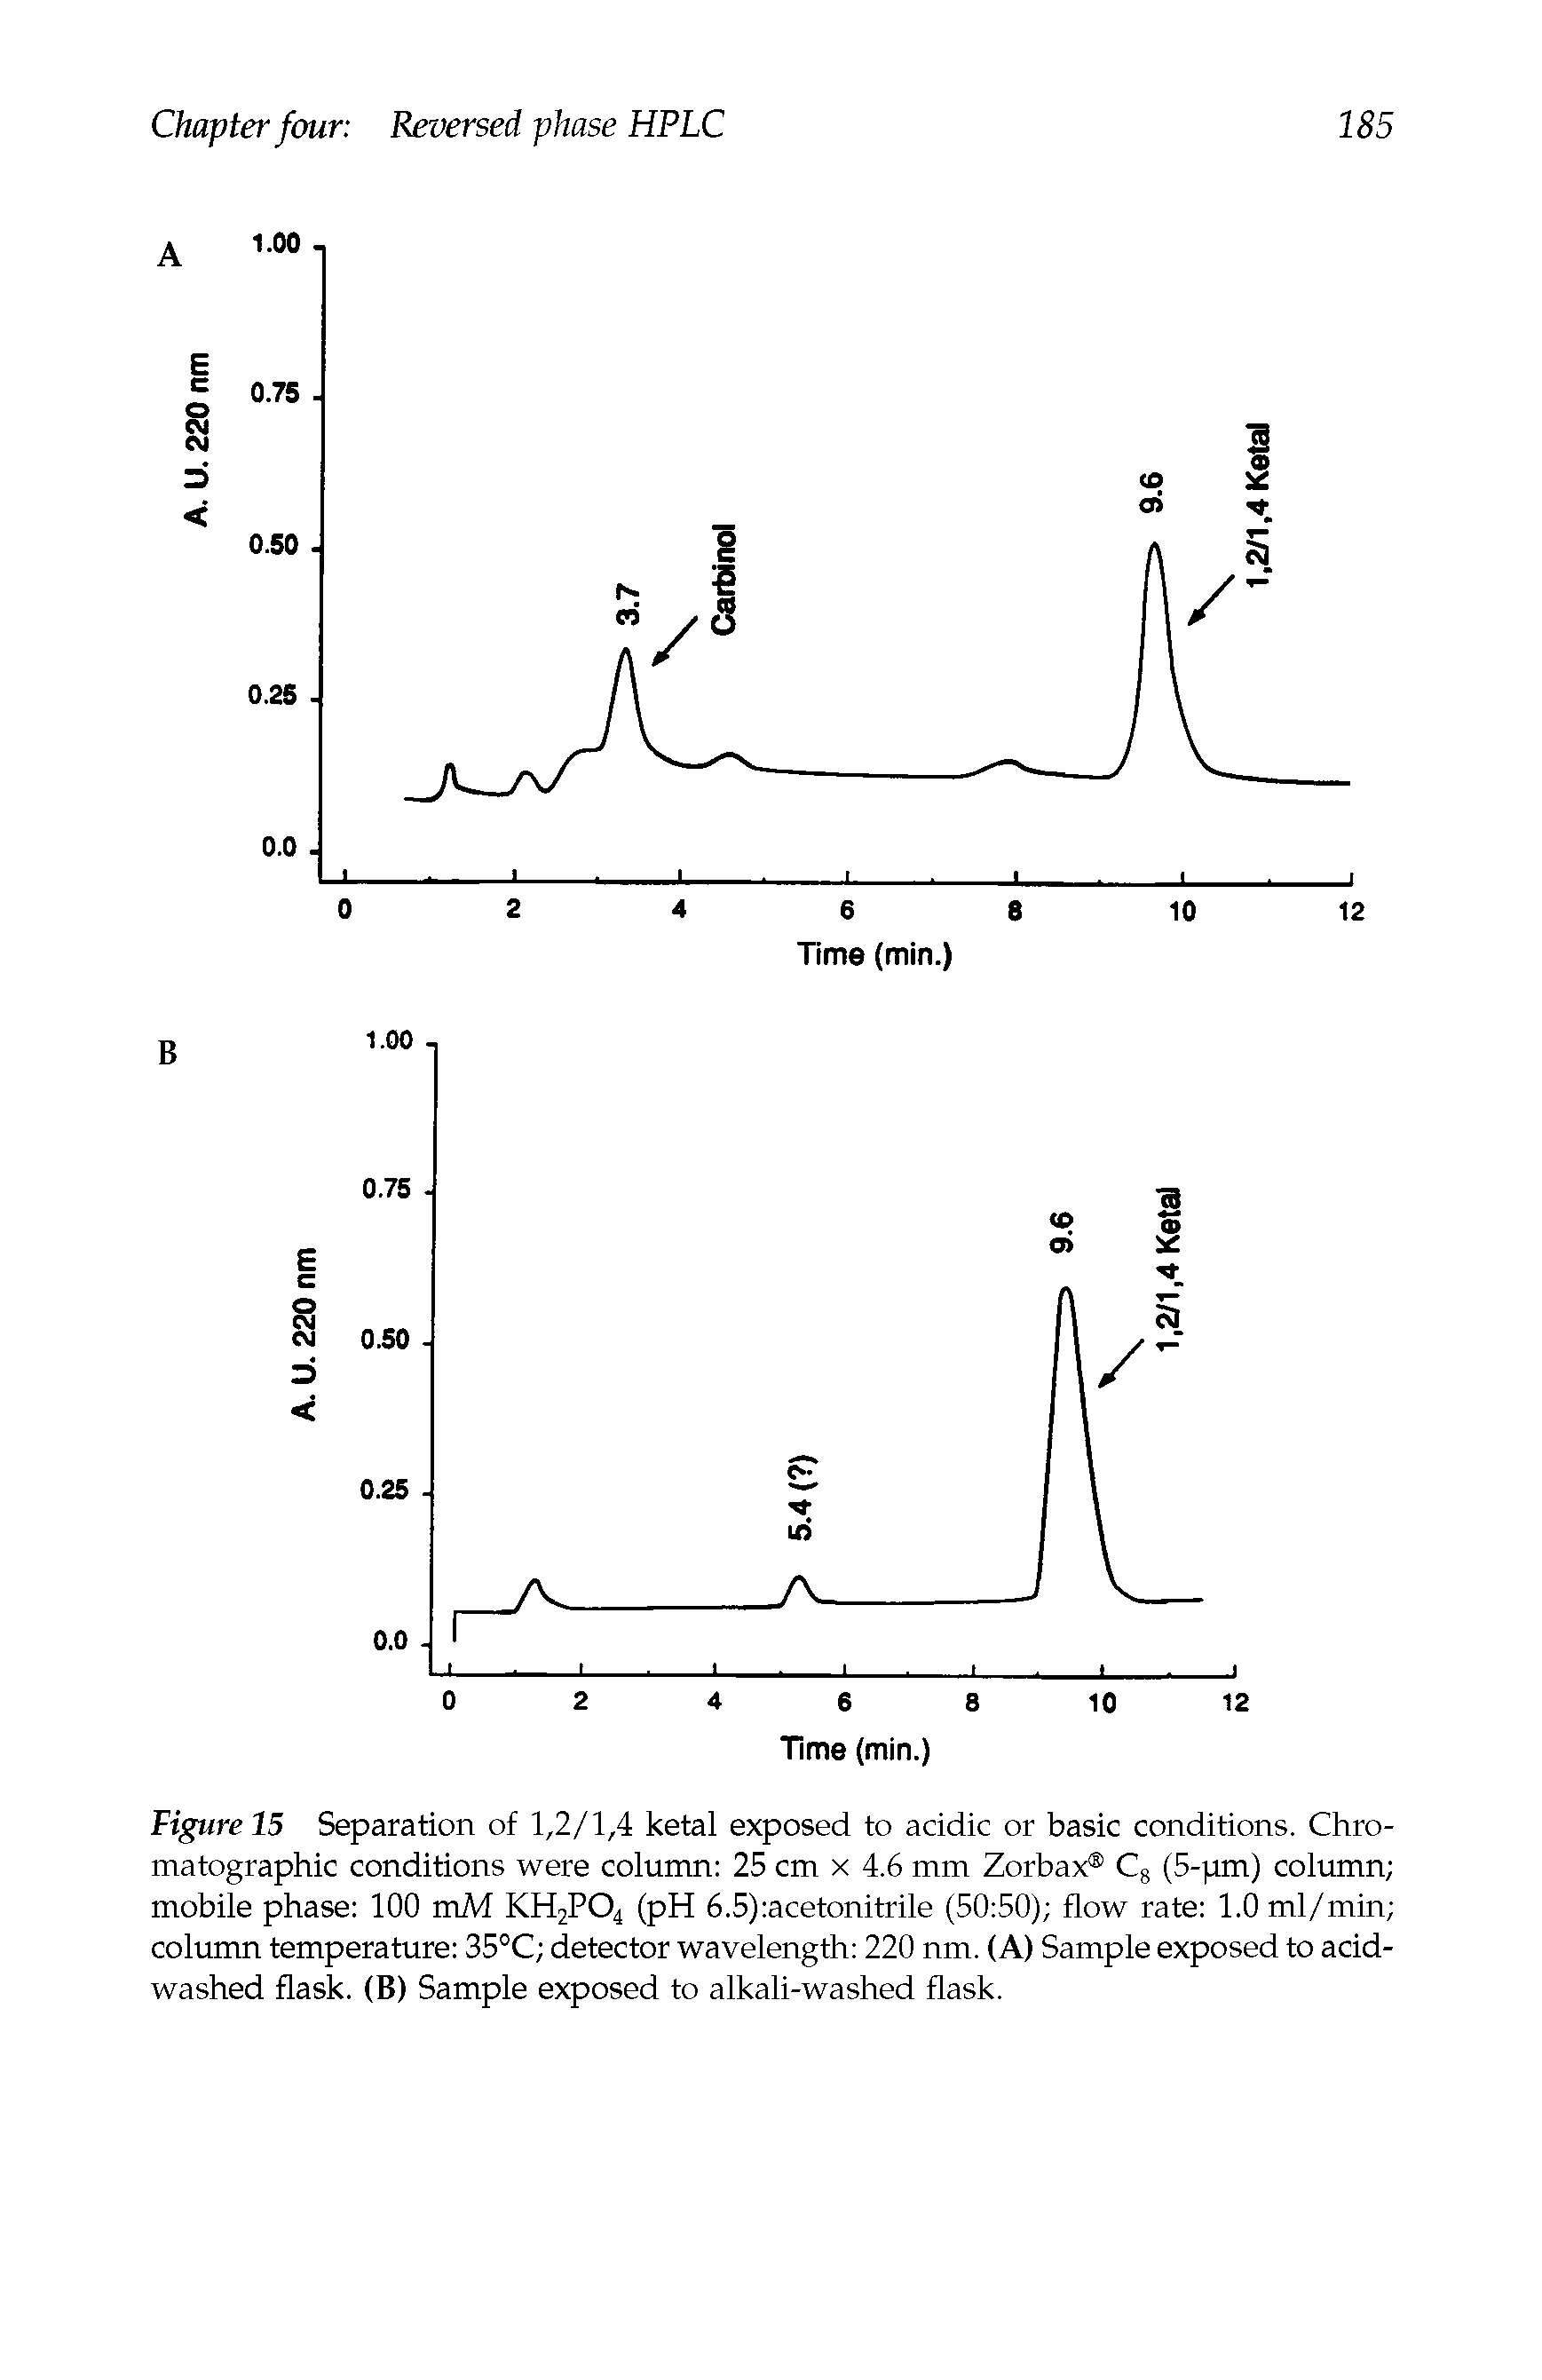 Figure 15 Separation of 1,2/1,4 ketal exposed to acidic or basic conditions. Chromatographic conditions were column 25 cm x 4.6 mm Zorbax C8 (5-pm) column mobile phase 100 mM KH2P04 (pH 6.5) acetonitrile (50 50) flow rate 1.0 ml/min column temperature 35°C detector wavelength 220 nm. (A) Sample exposed to acid-washed flask. (B) Sample exposed to alkali-washed flask.